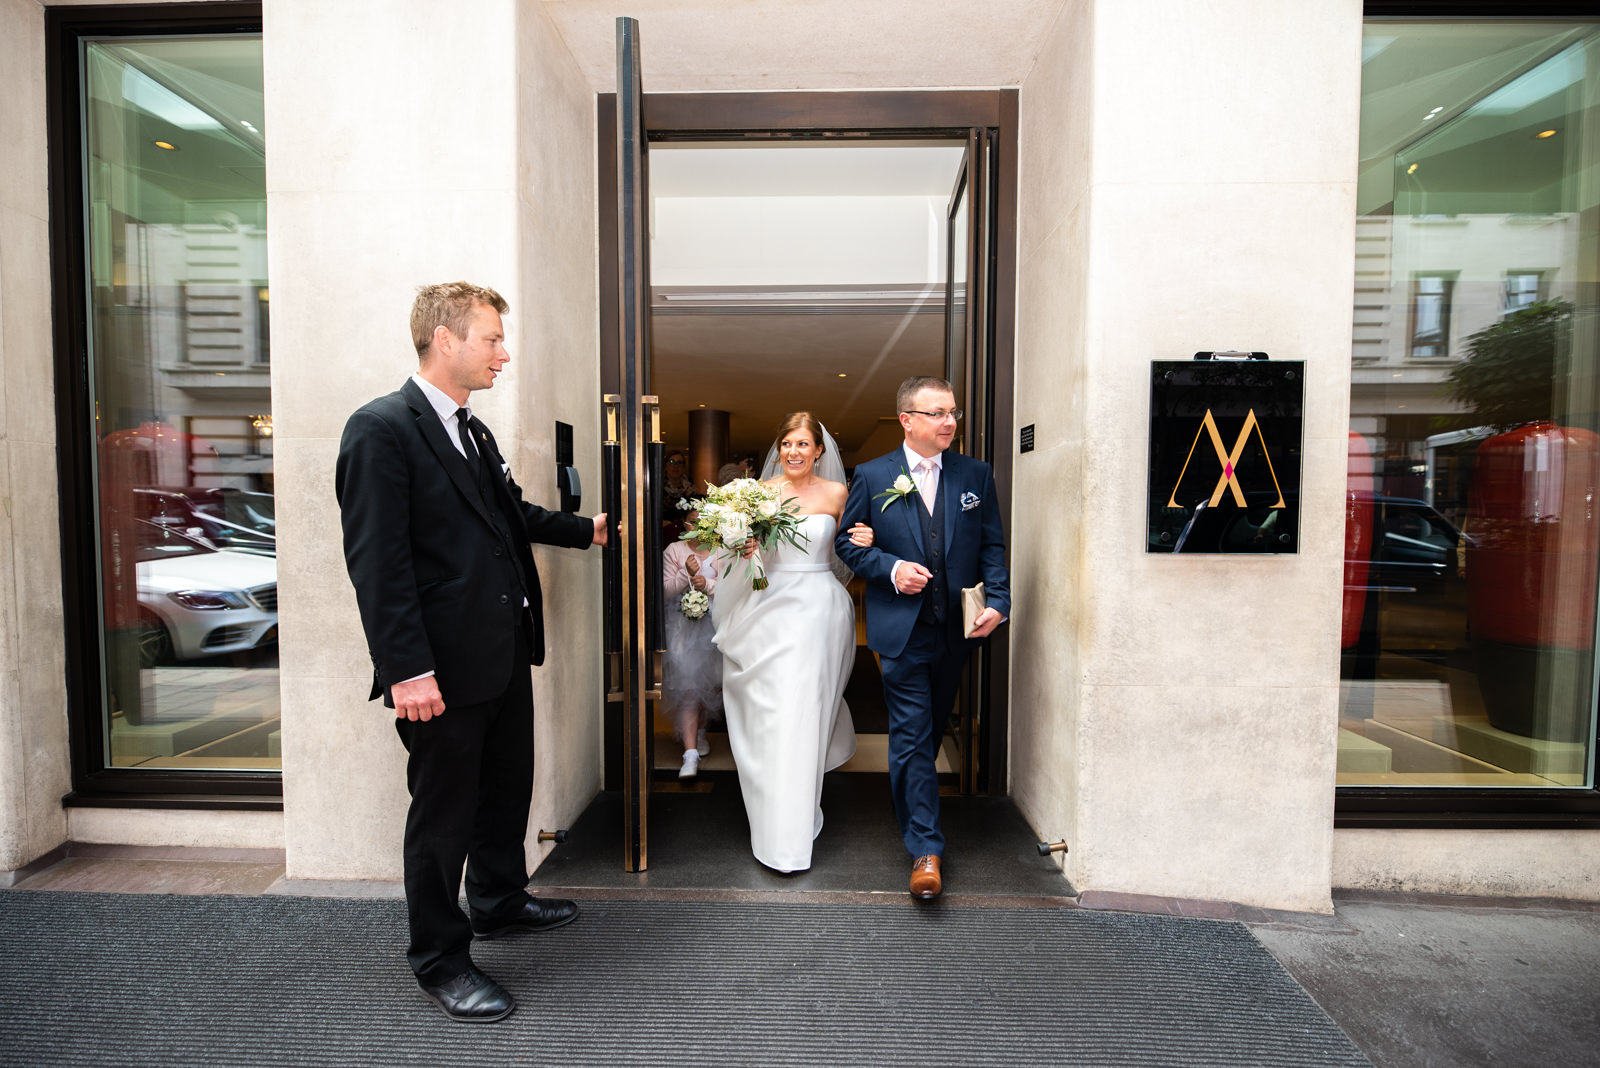 The May Fair Hotel wedding images